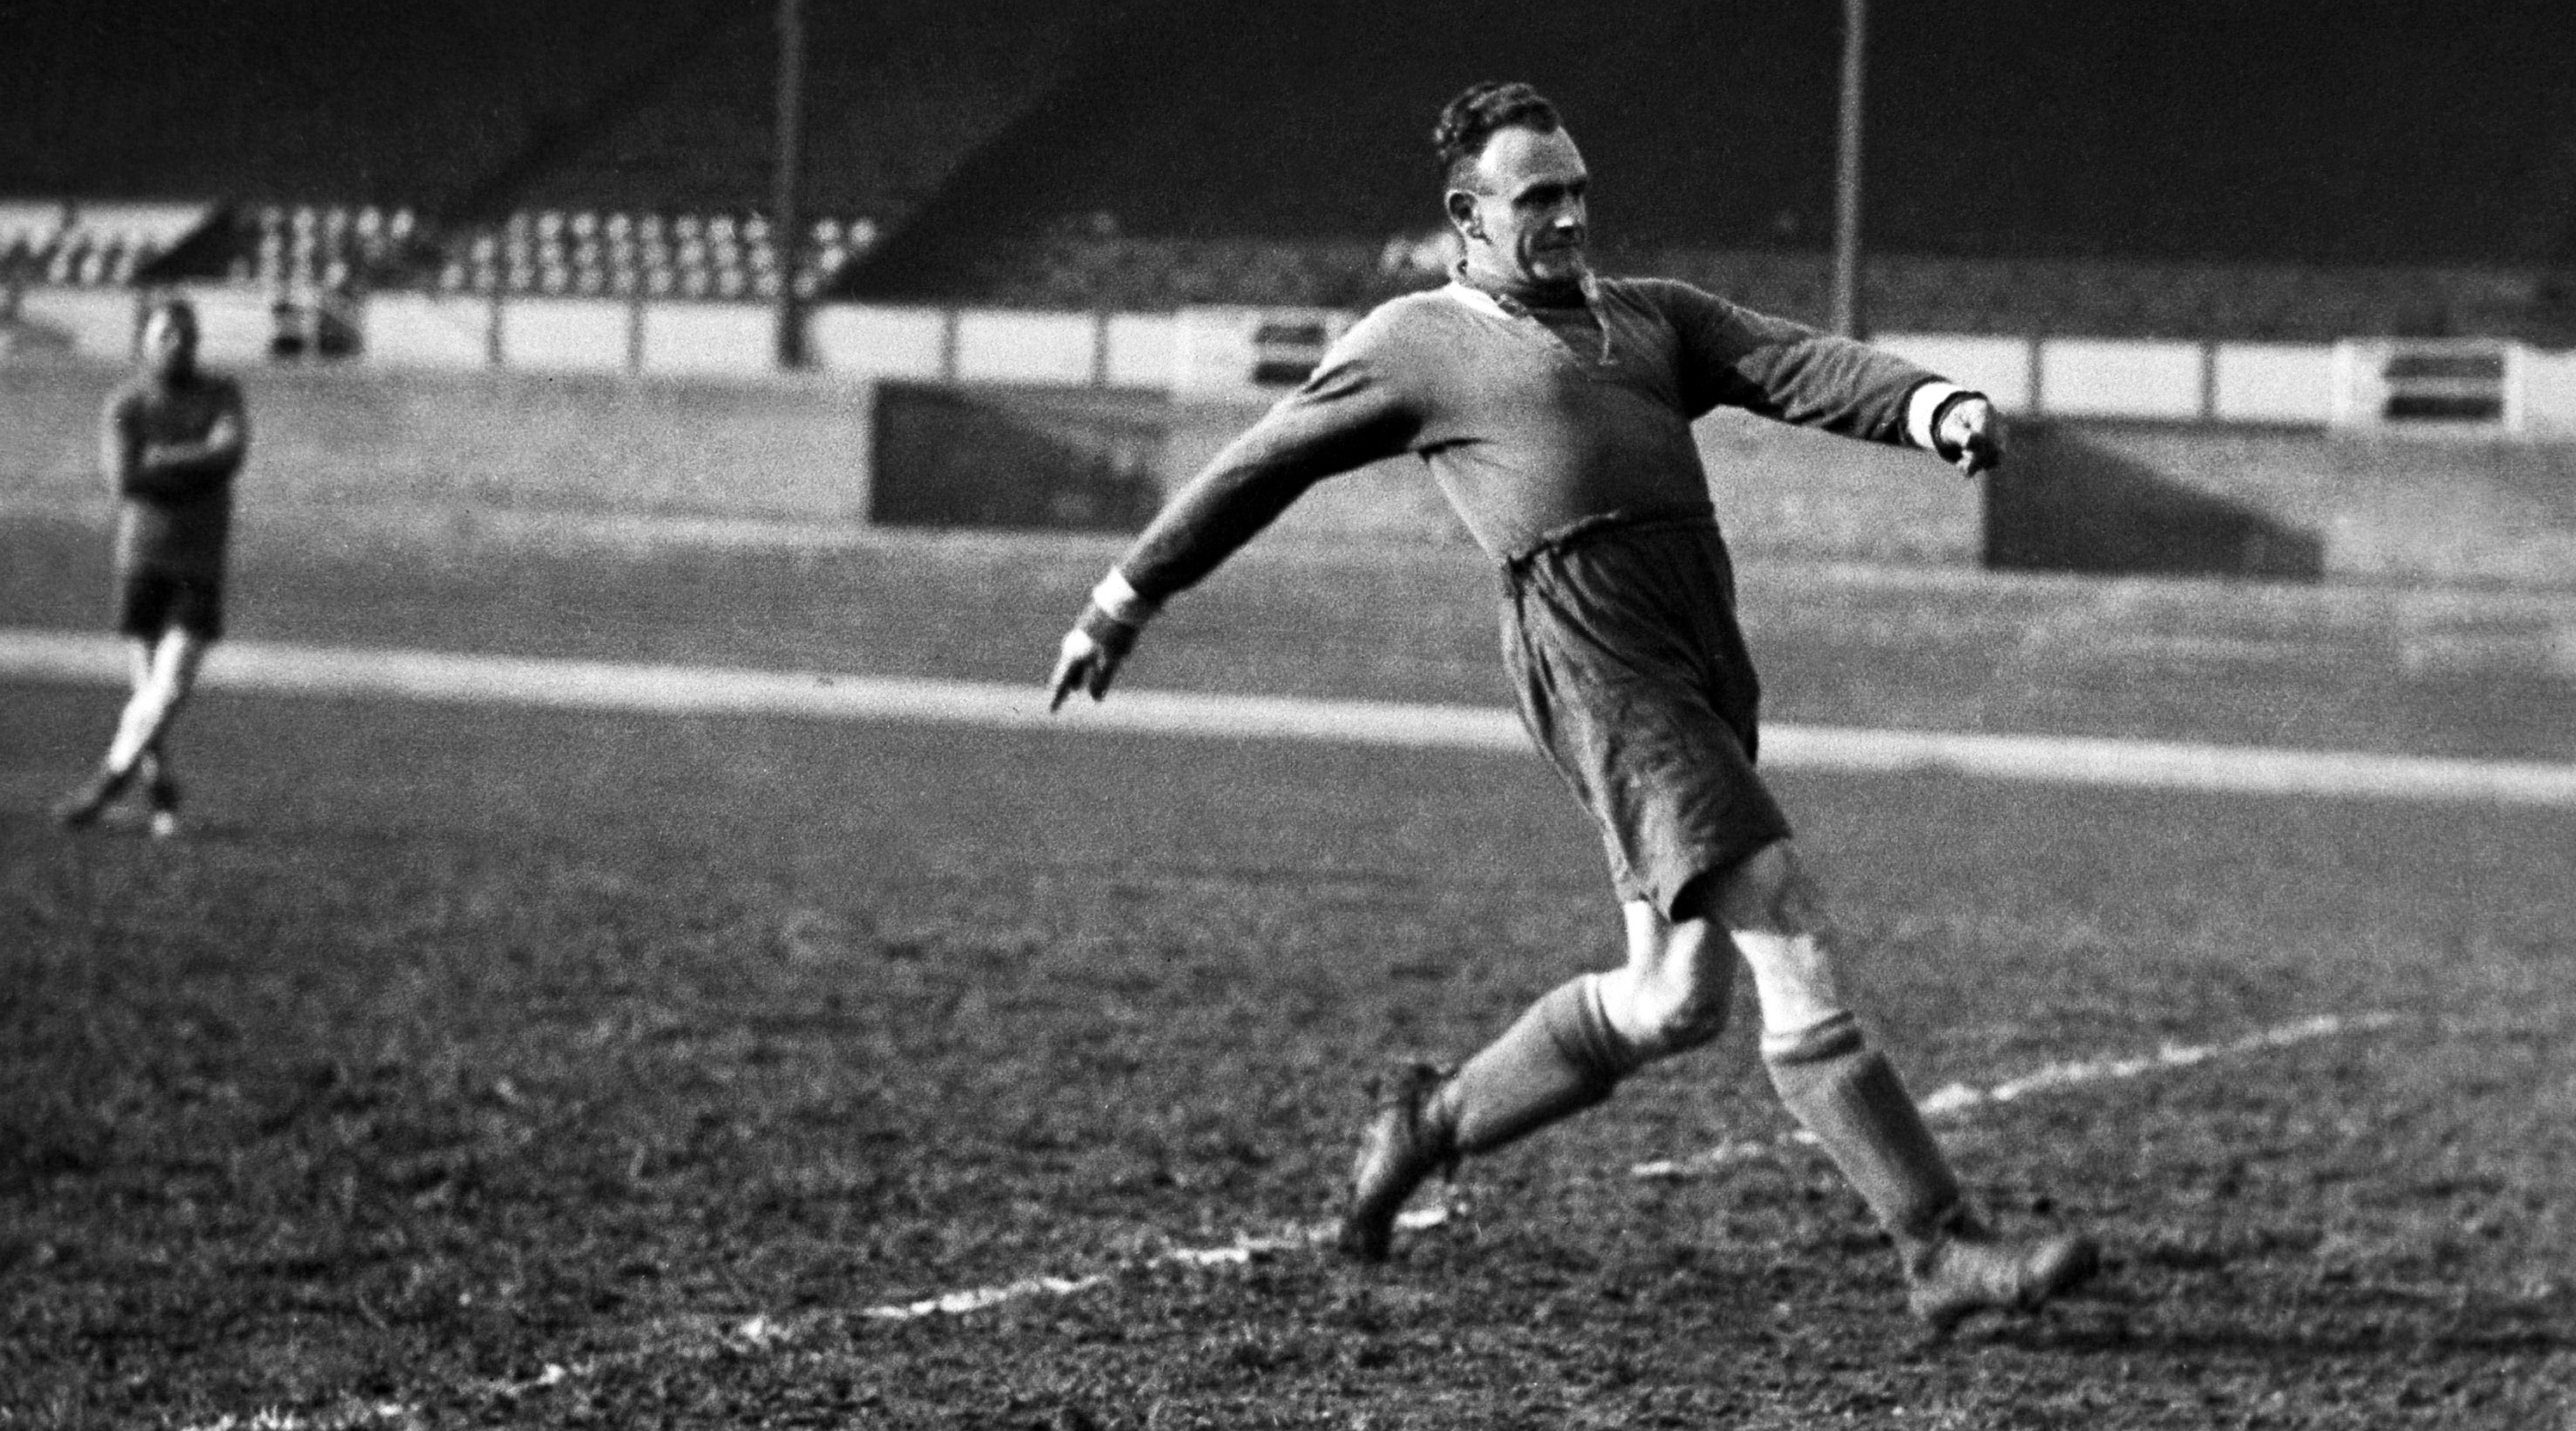 Having started out at QPR, Arthur Chandler spent the best years of his career with Leicester City, amassing 273 goals to become the Foxes’ record scorer. The striker bagged 203 of those in the First Division, including 34 in each of the 1927/28 and 1928/29 campaigns. Leicester finished as runners-up in the latter, one point behind champions Sheffield Wednesday.